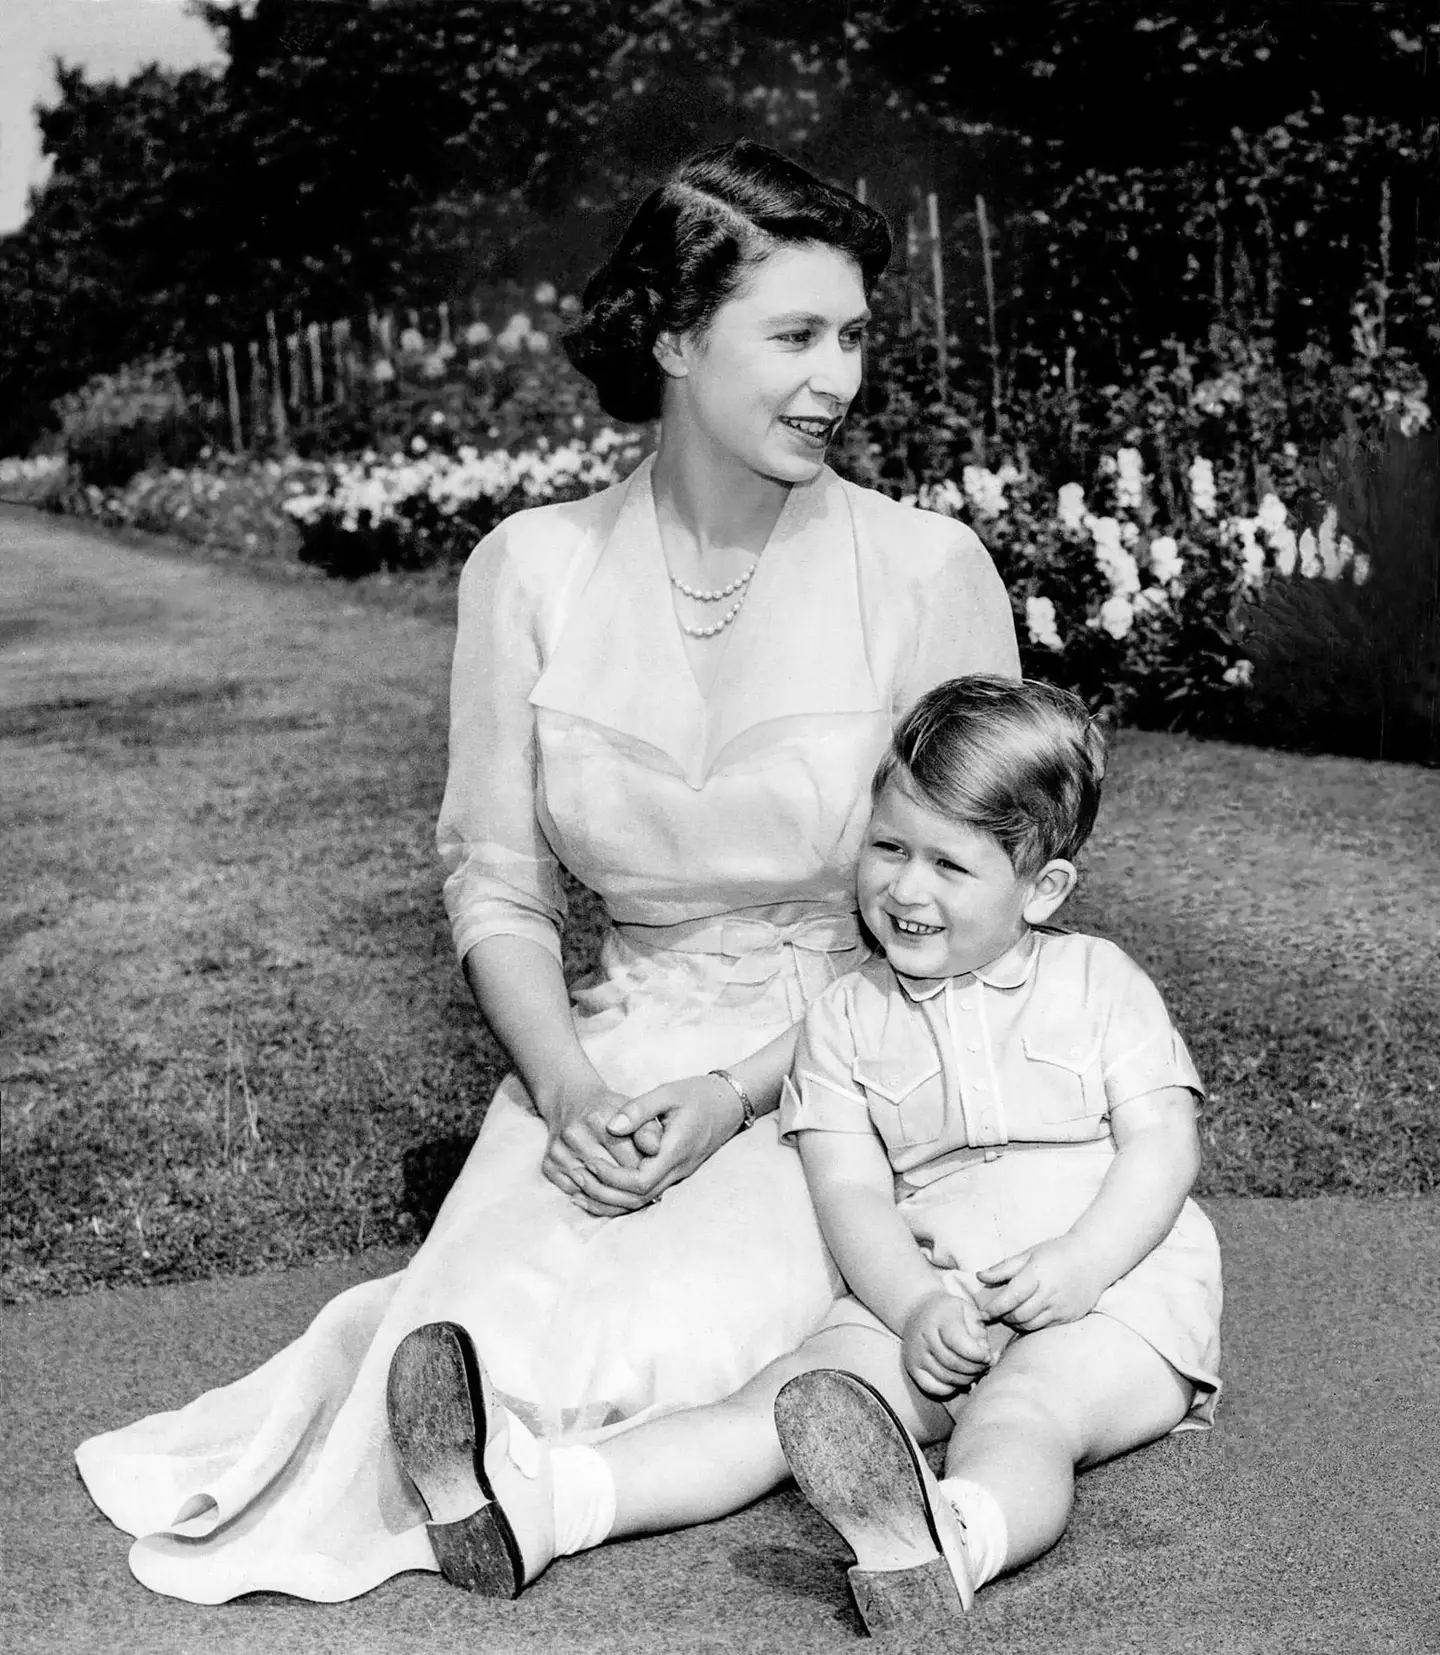 The Queen with Charles in August 1951.